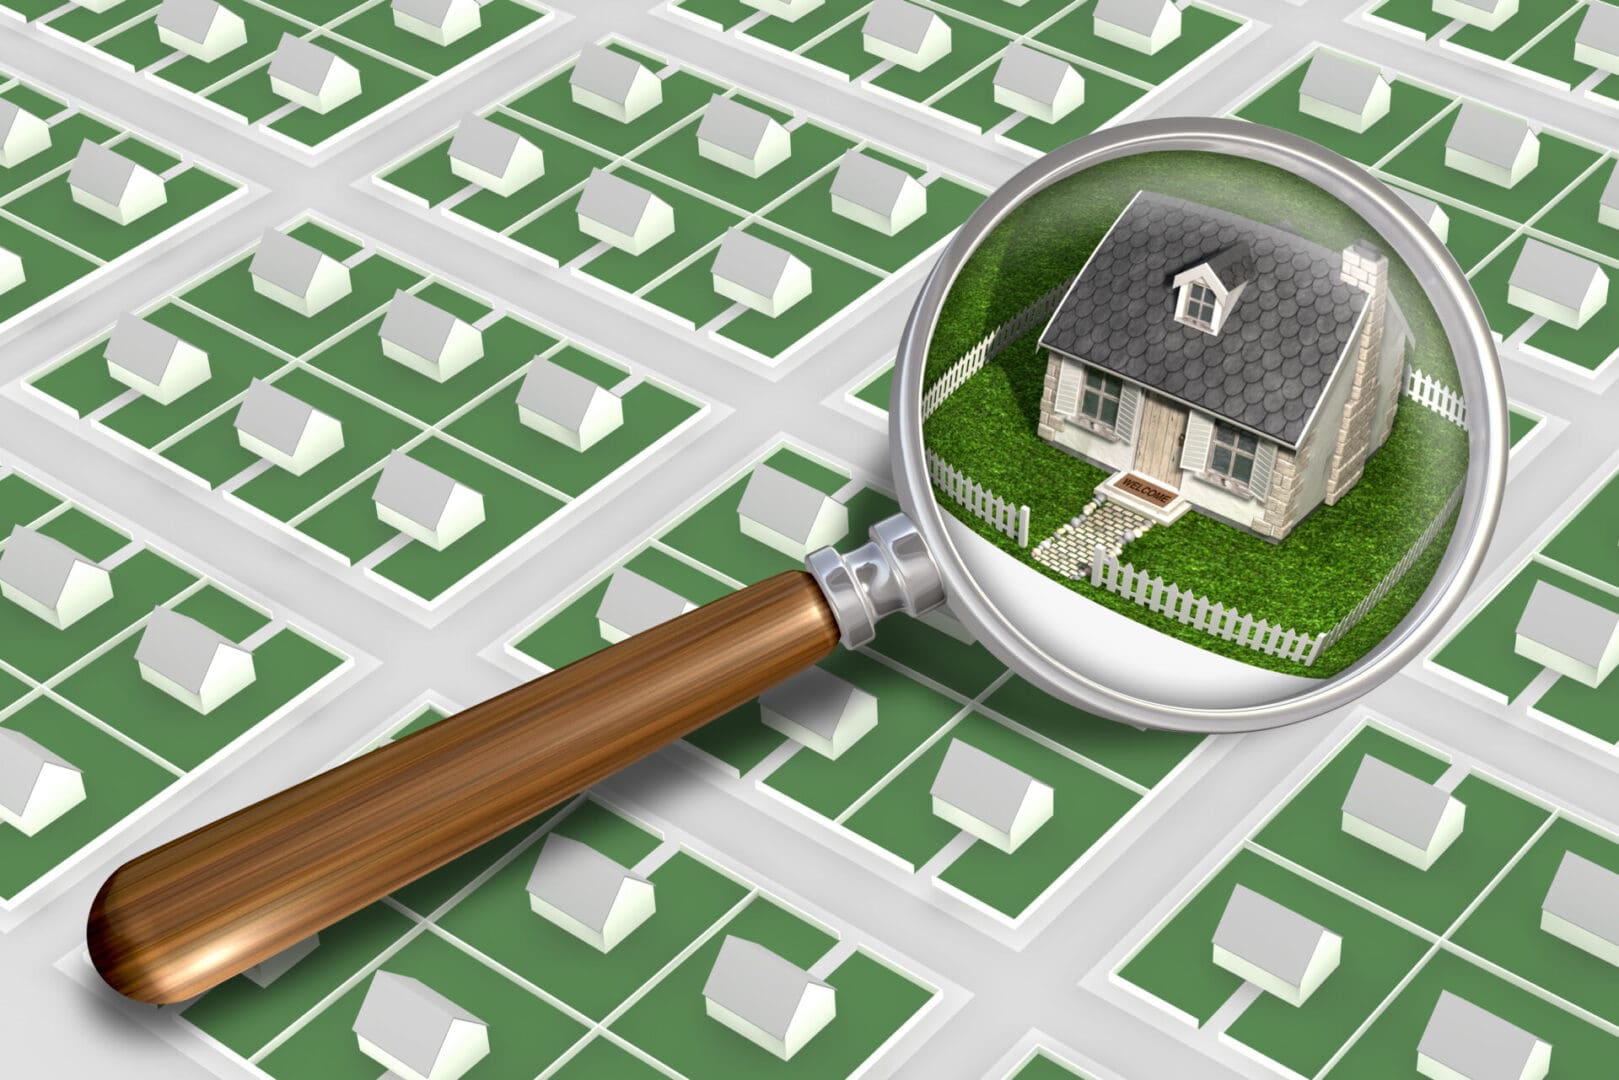 Magnifying glass focusing on a single "unicorn home" in a grid of homes, symbolizing property search or real estate examination.